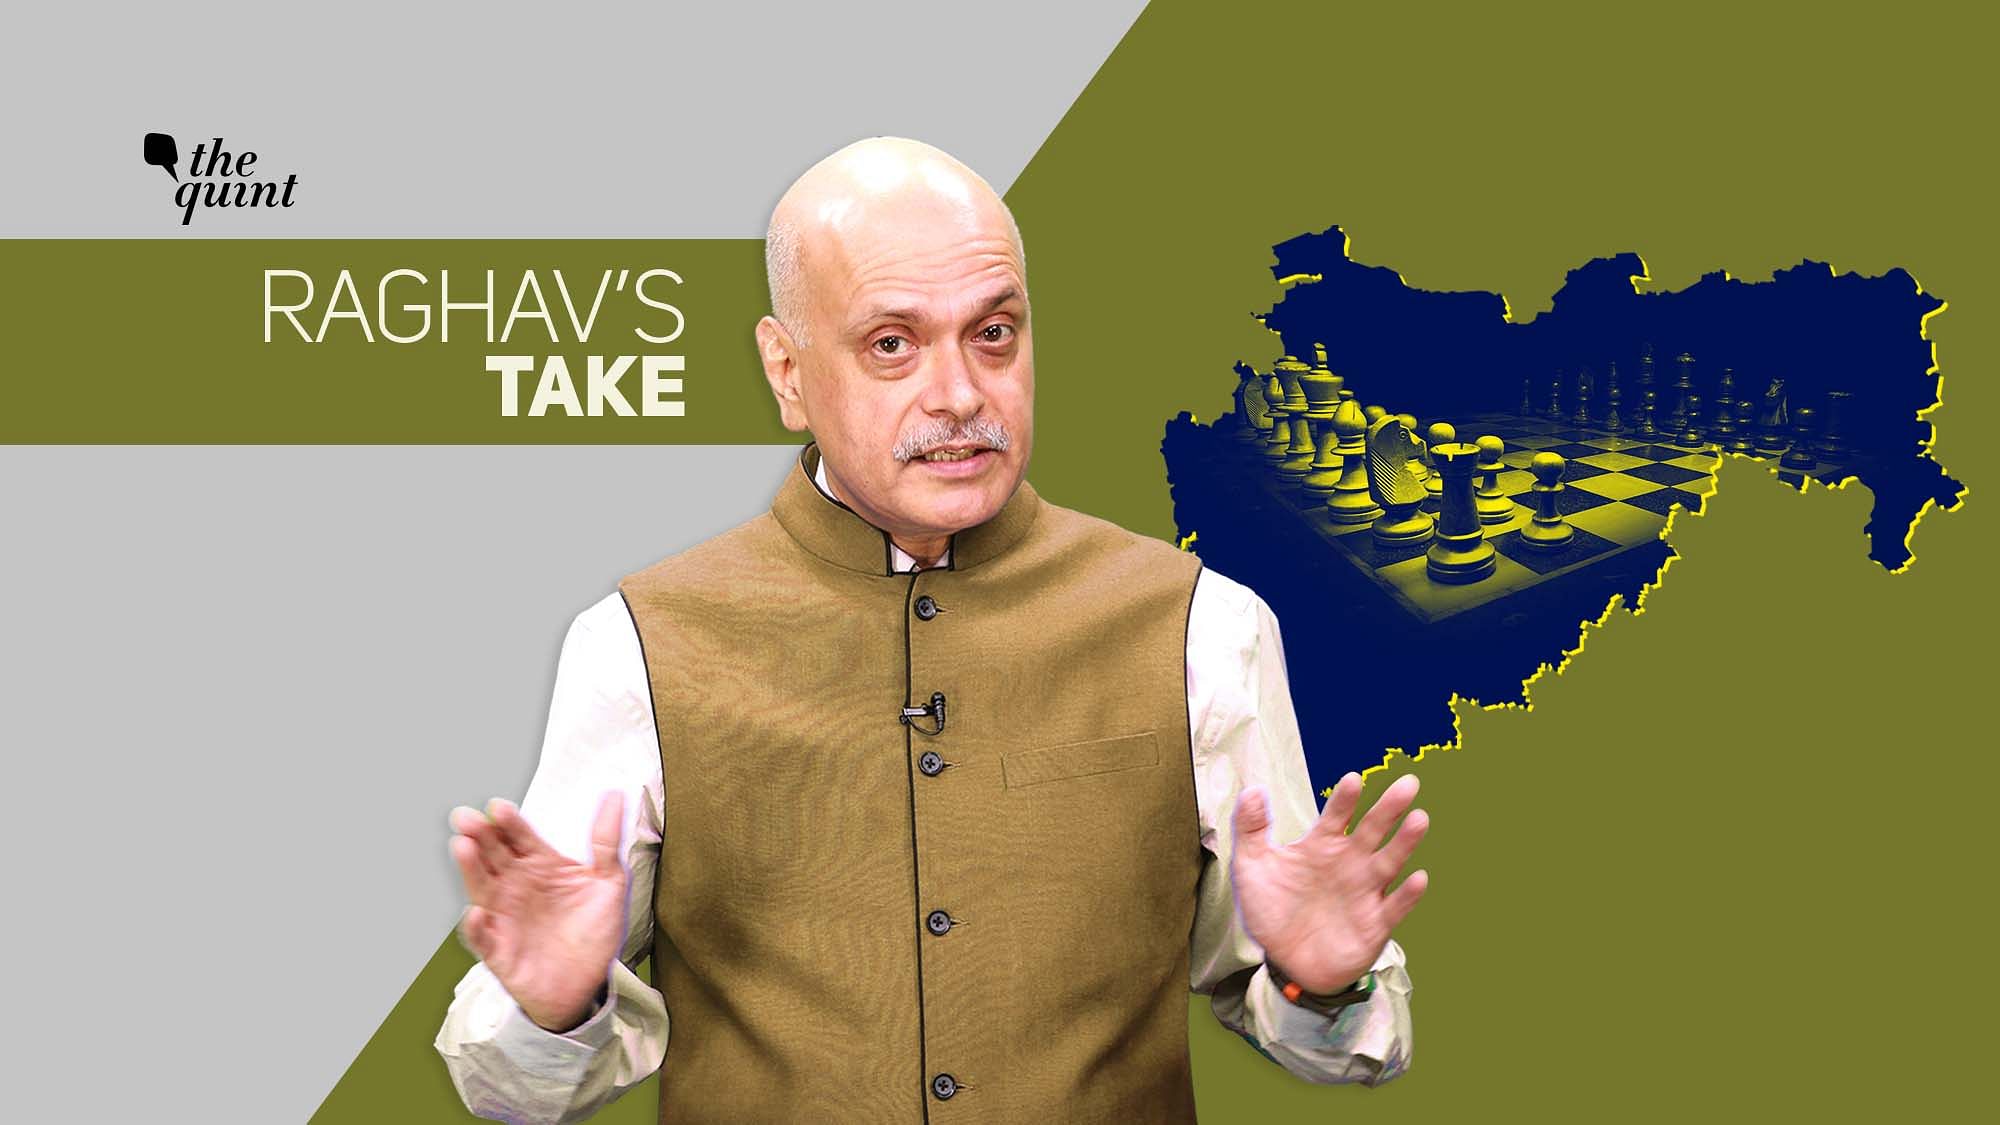 Image of The Quint’s Editor-in-Chief, Raghav Bahl, and map of Maharashtra, used for representational purposes.